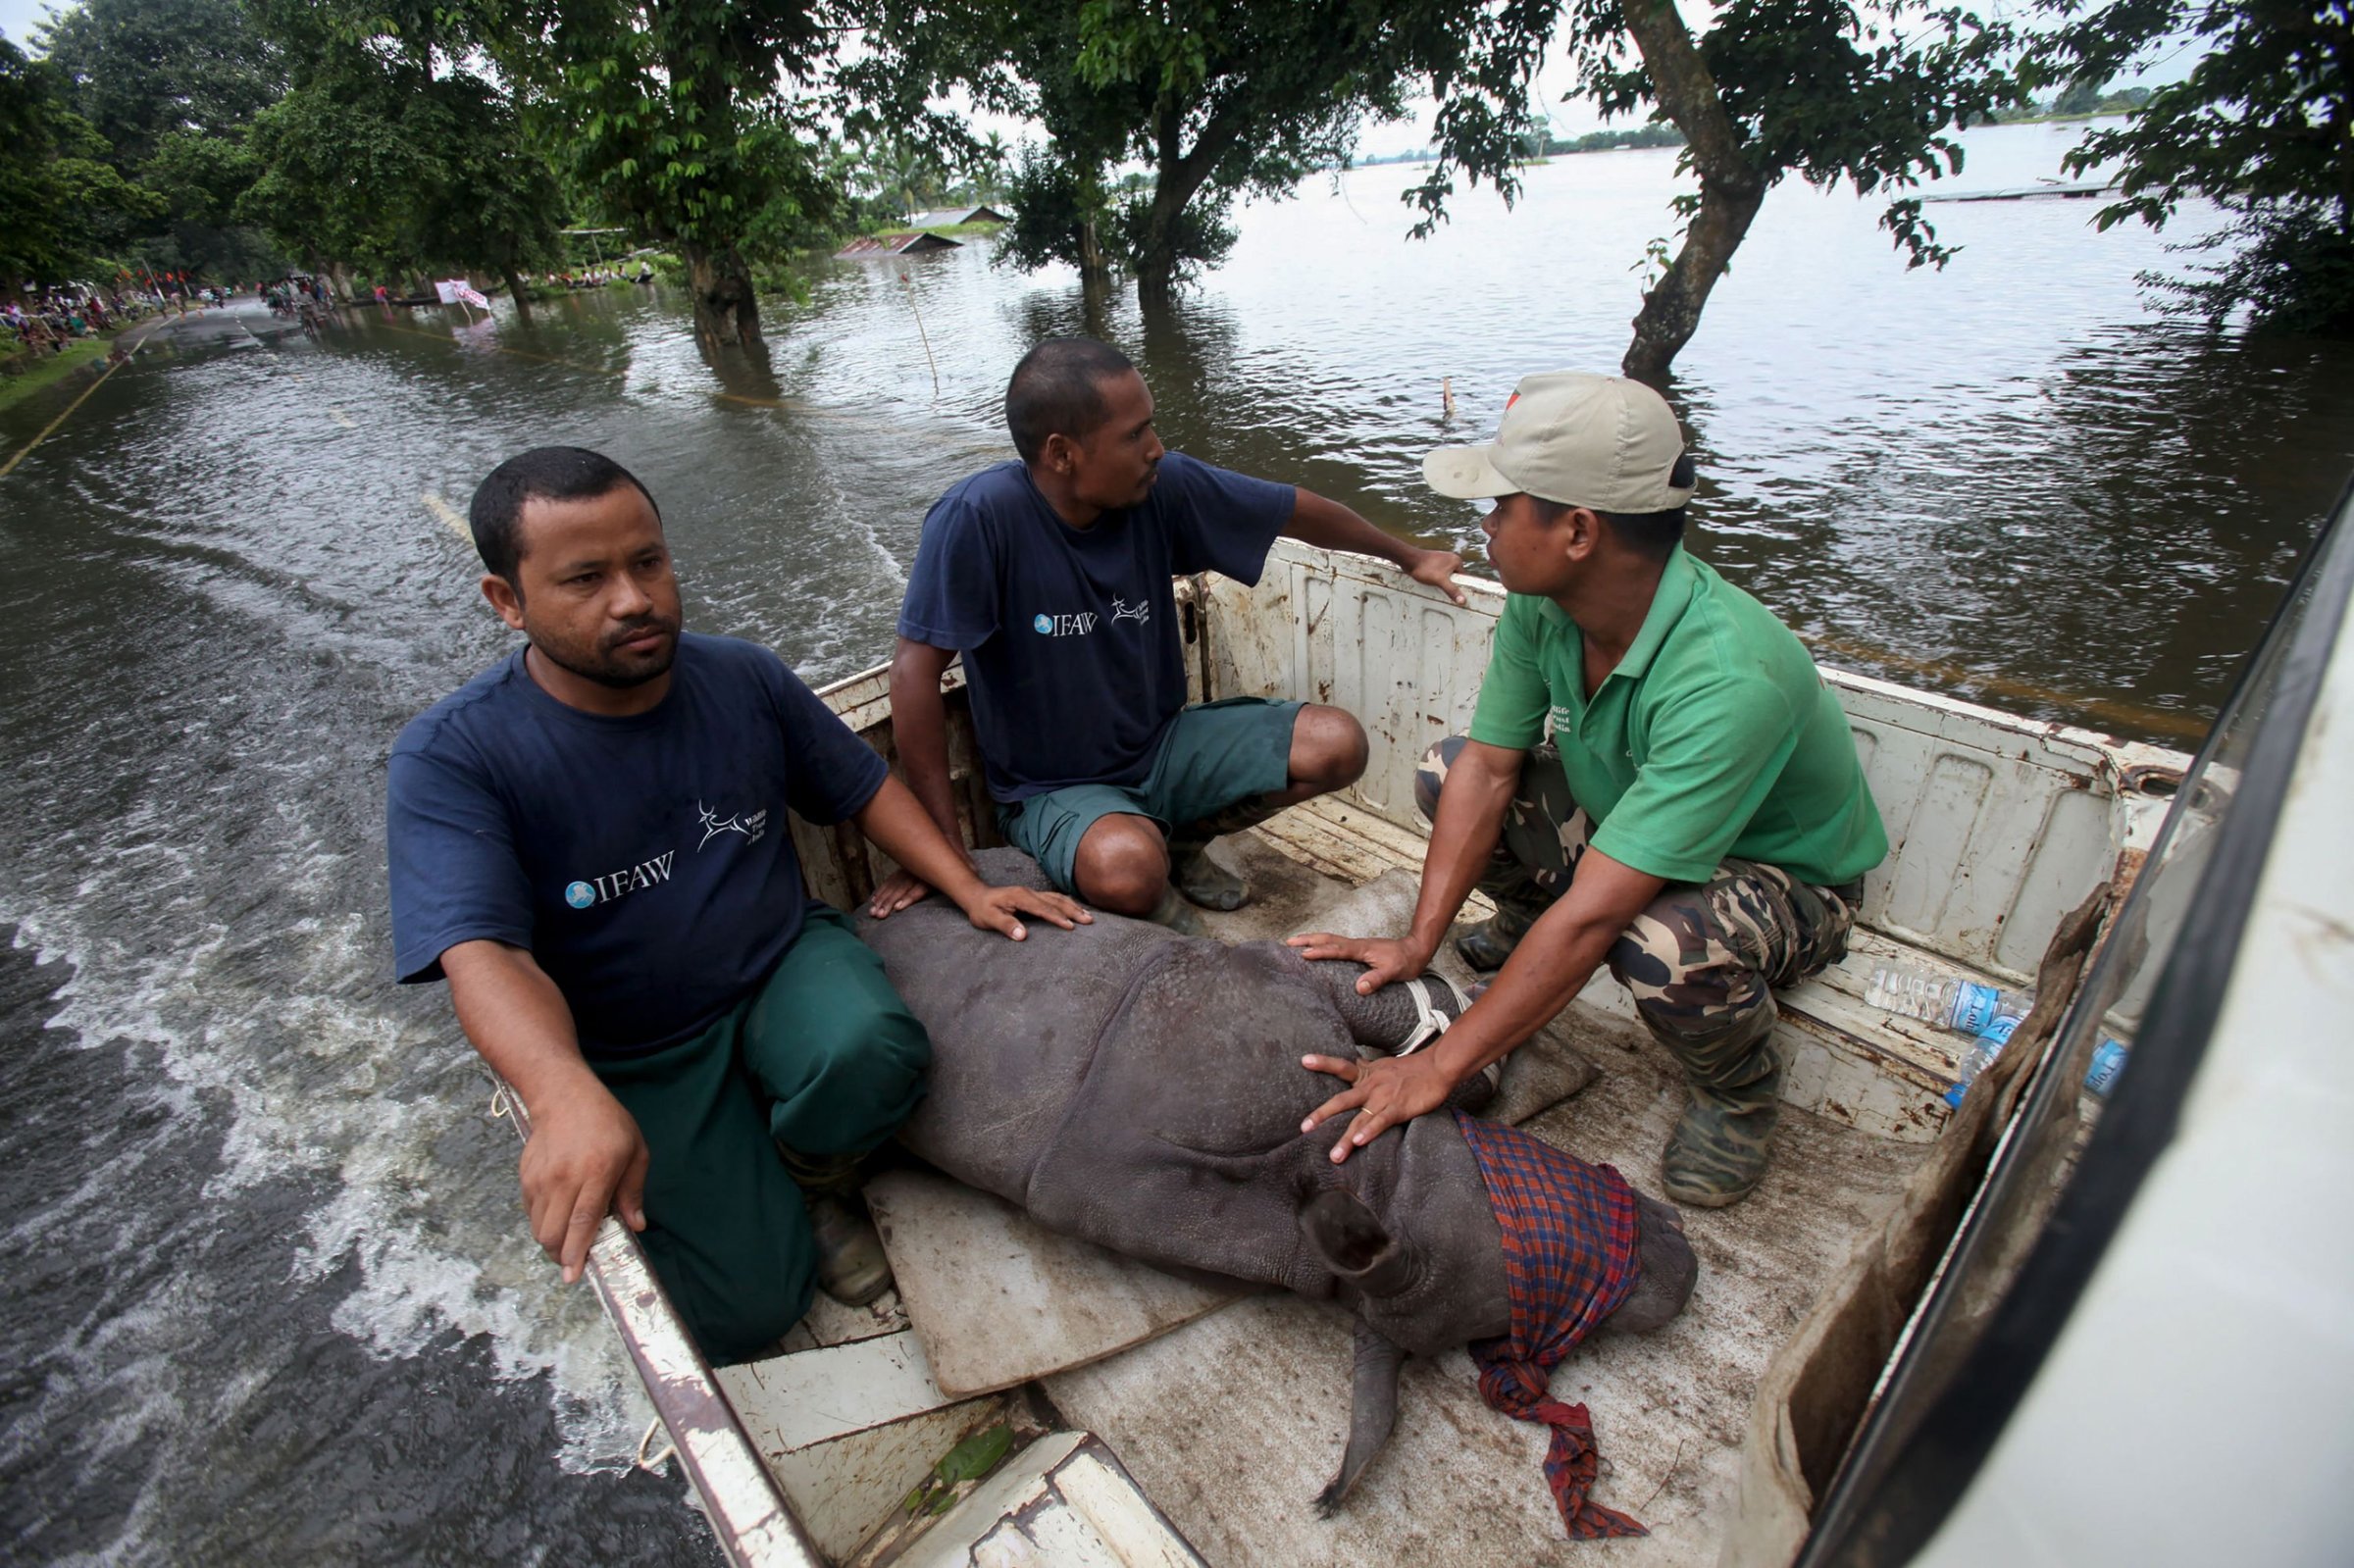 A rescued infant rhino calf is transported to safety after being found by IFAW-WTI wildlife officials and volunteers in flood waters in the Sildubi area of the Bagori forest range of Kaziranga National Park in the northeastern Indian state of Assam. on July 27, 2016.